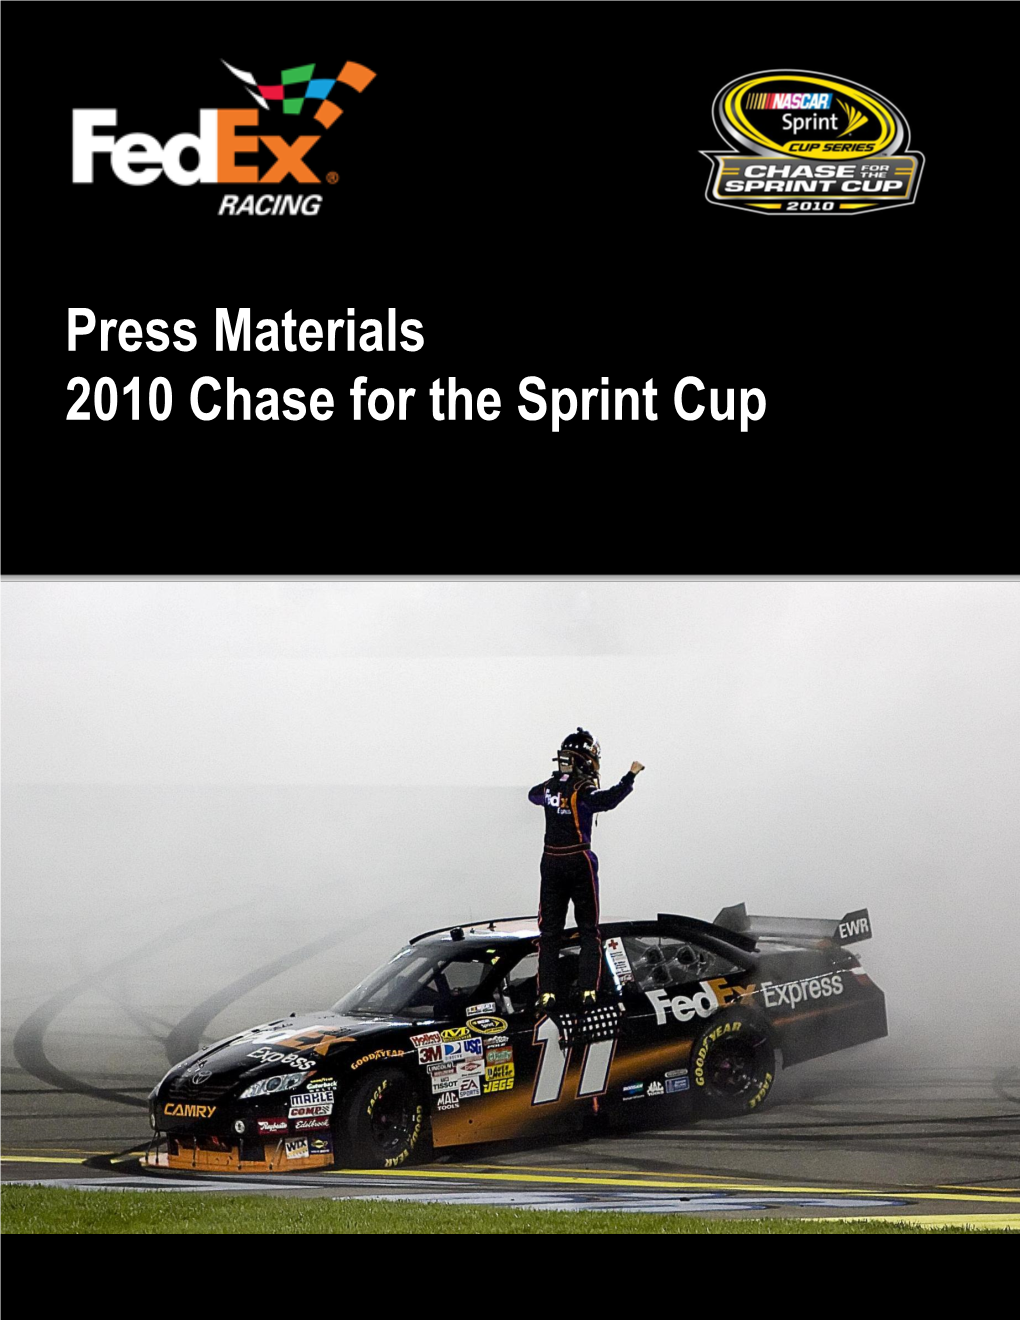 Press Materials 2010 Chase for the Sprint Cup